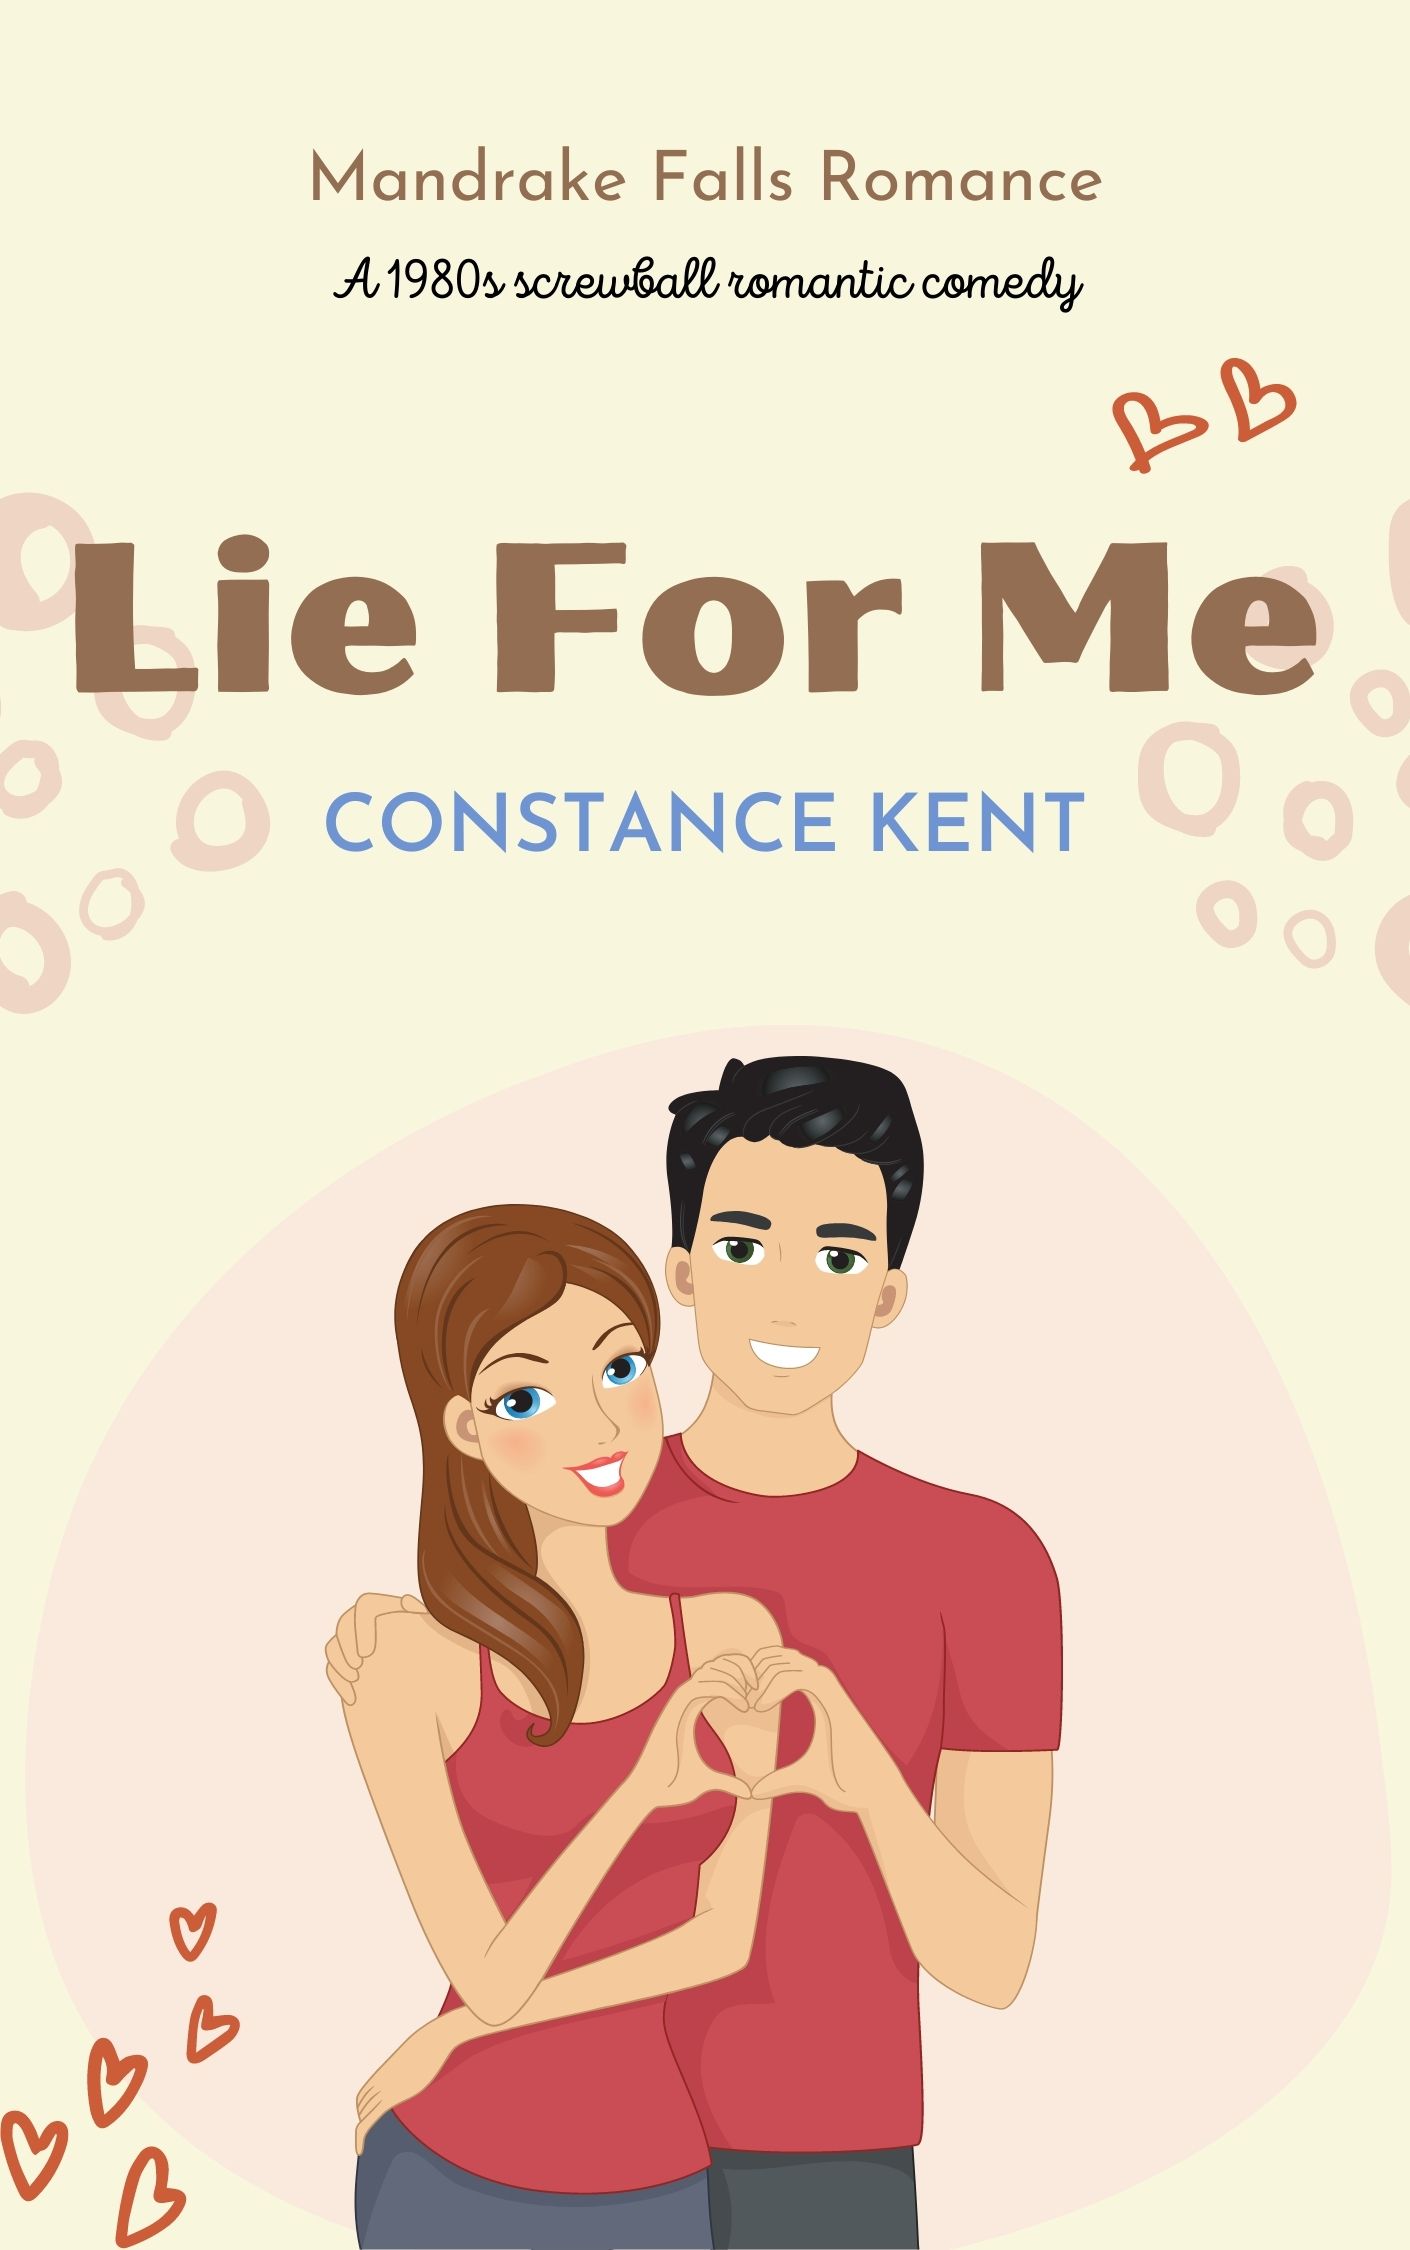 Lie for Me Romantic Comedy series book two